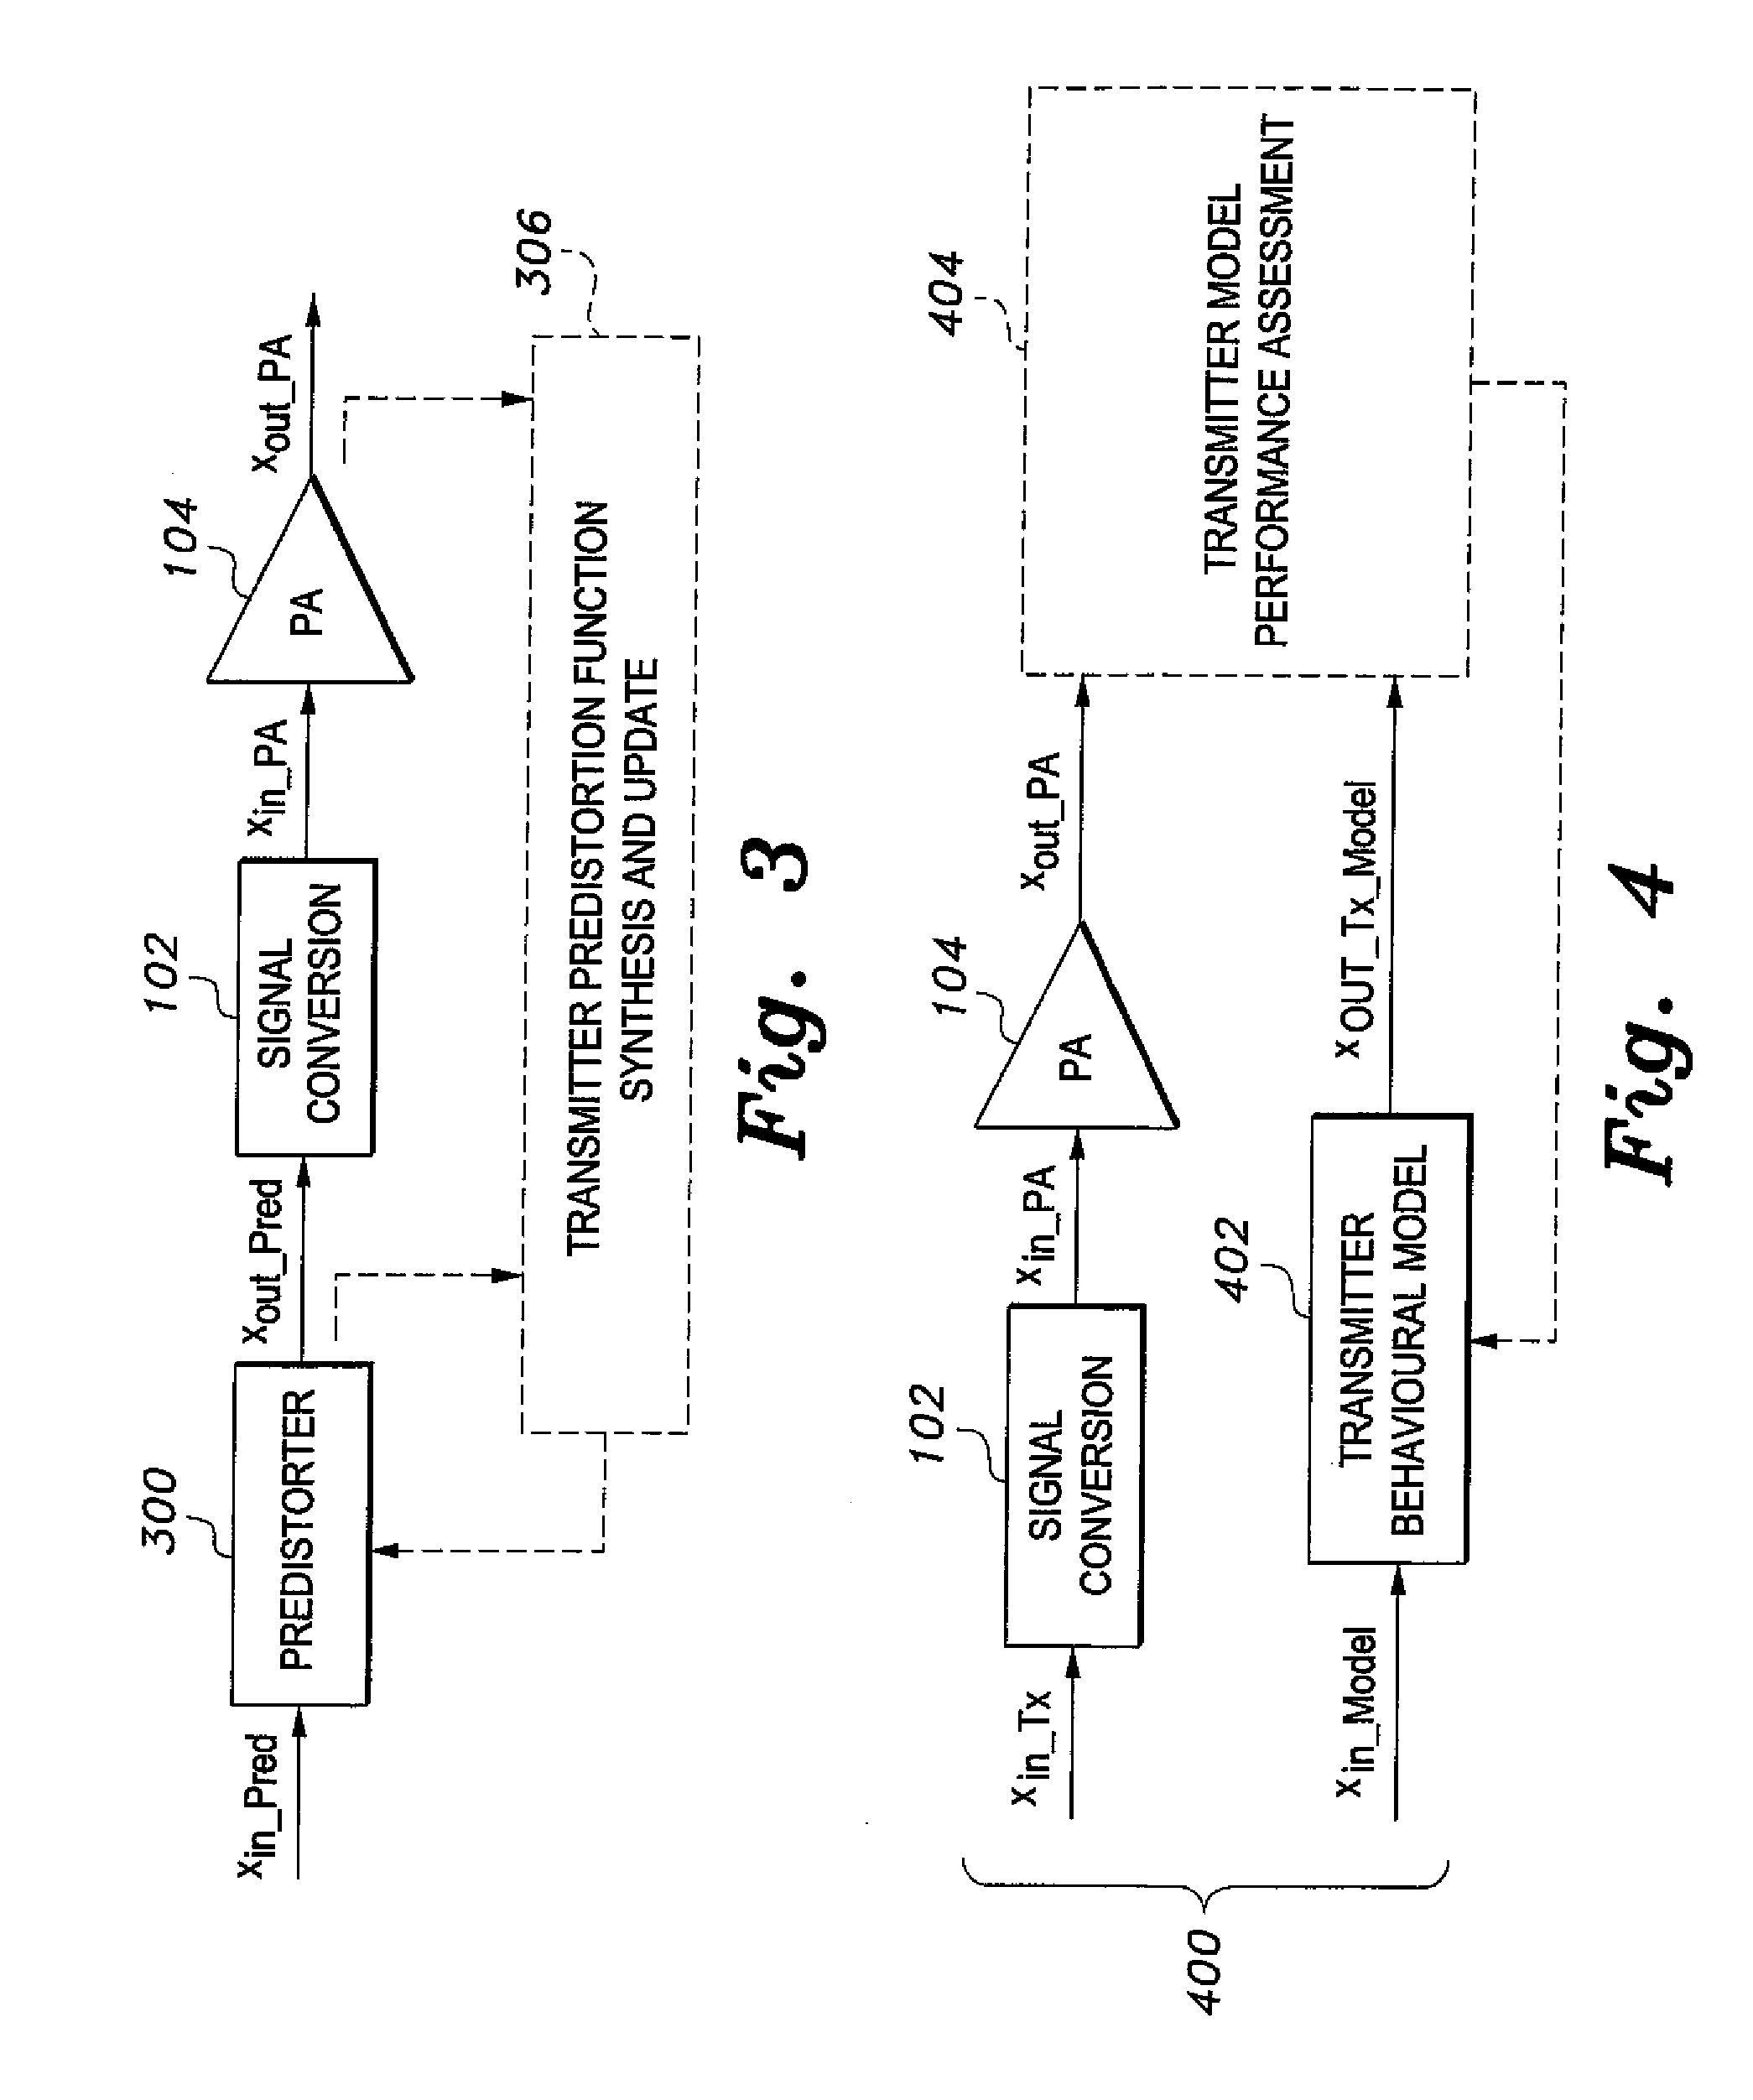 Augmented twin nonlinear two-box modeling and predistortion method for power amplifiers and transmitters